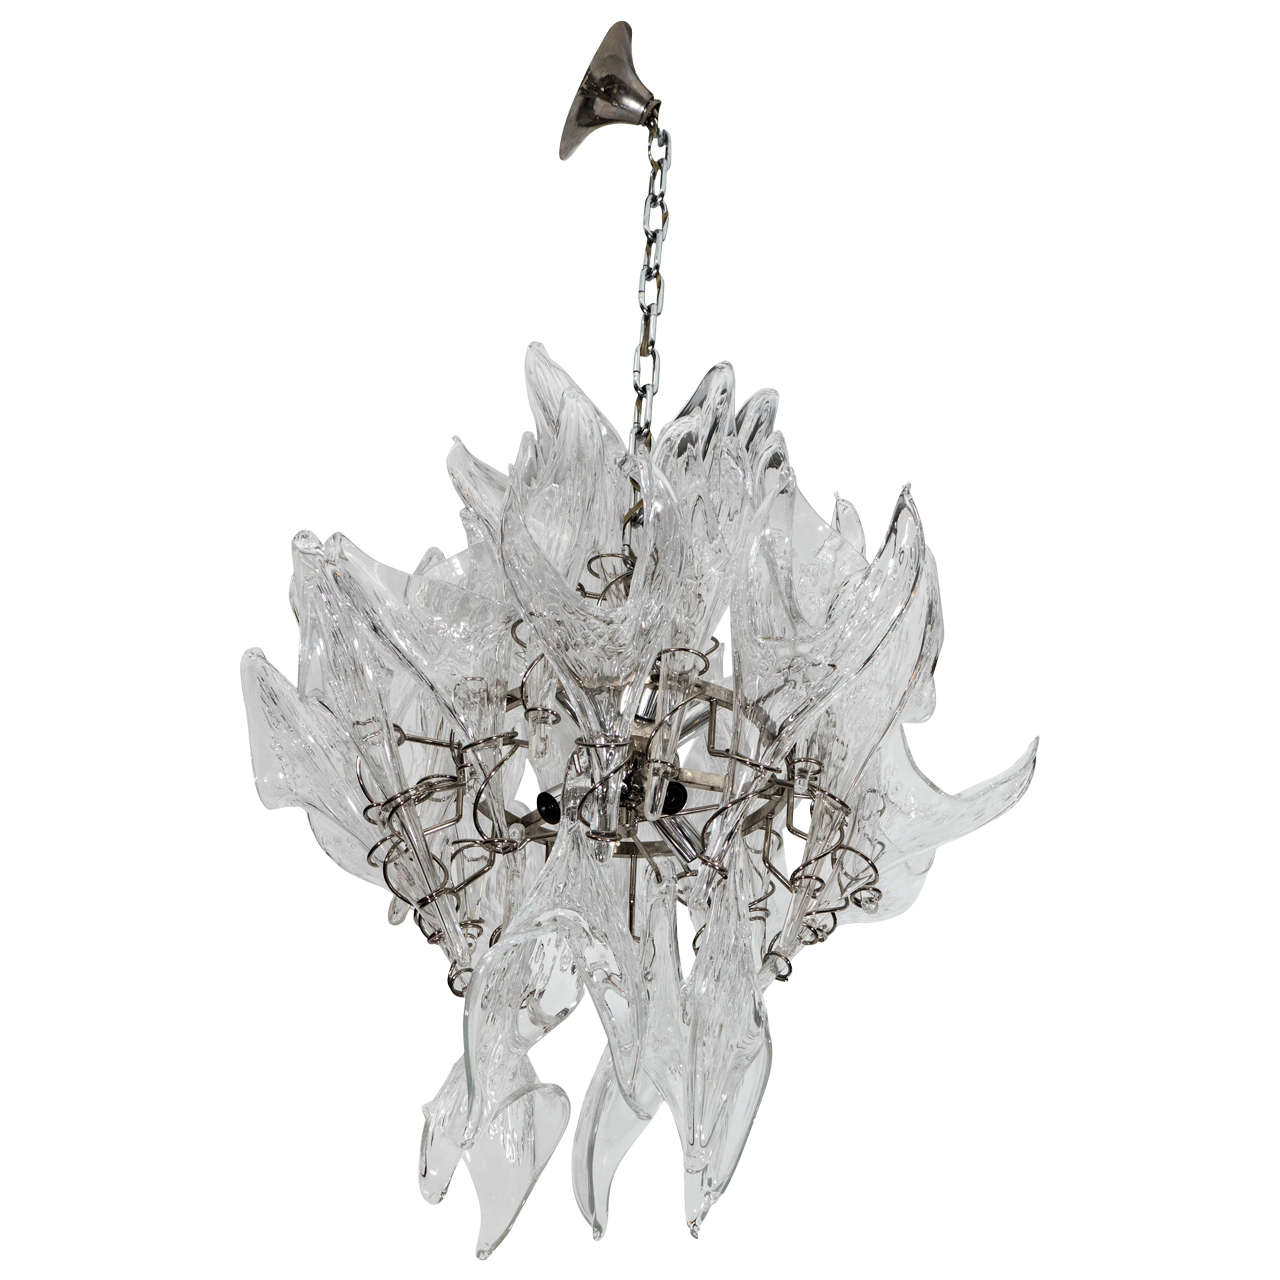 A Midcentury Murano Glass Chandelier For Sale